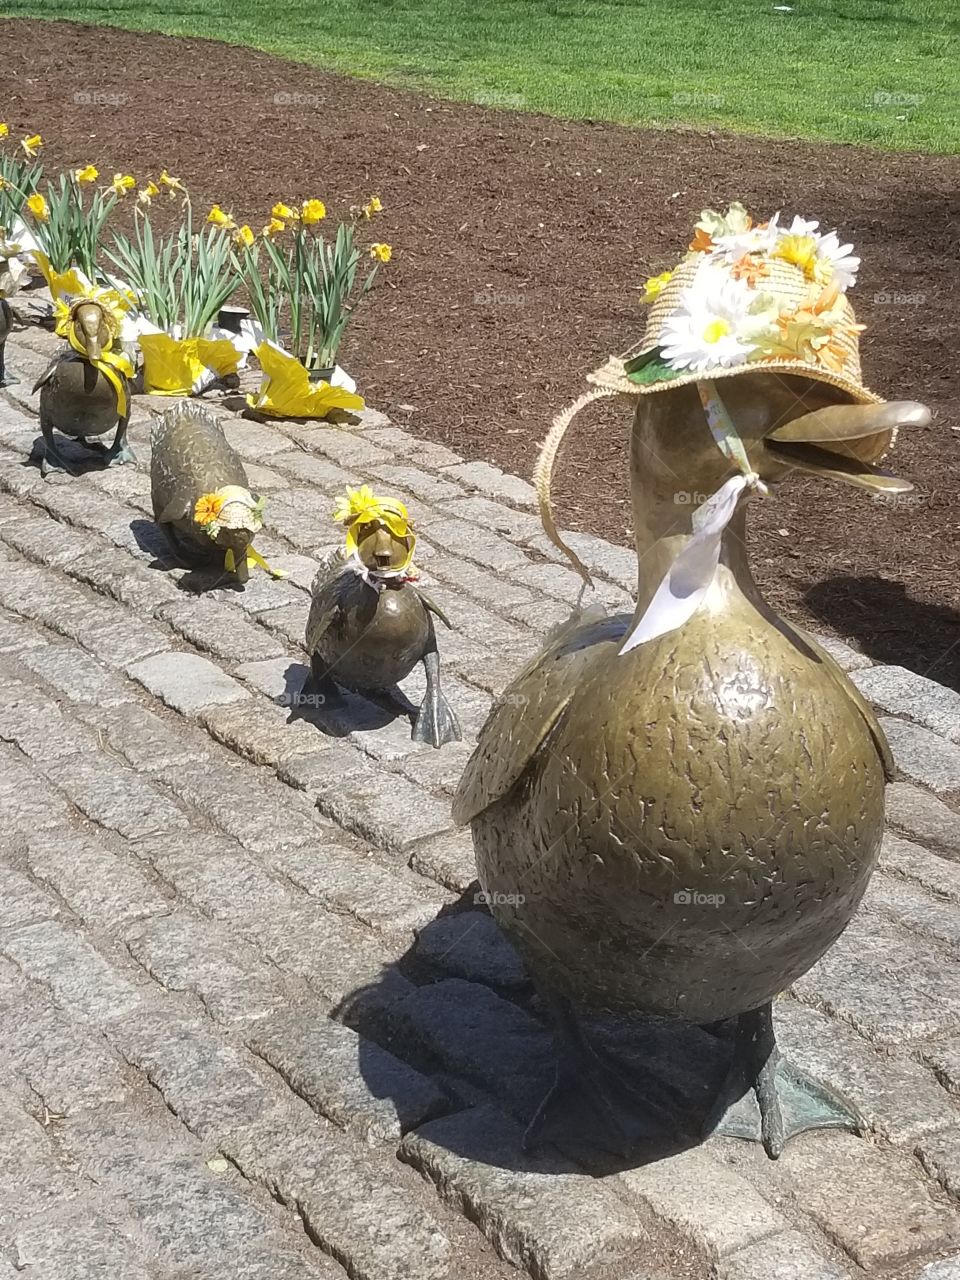 The famous ducks in Boston commons with Easter bonnets